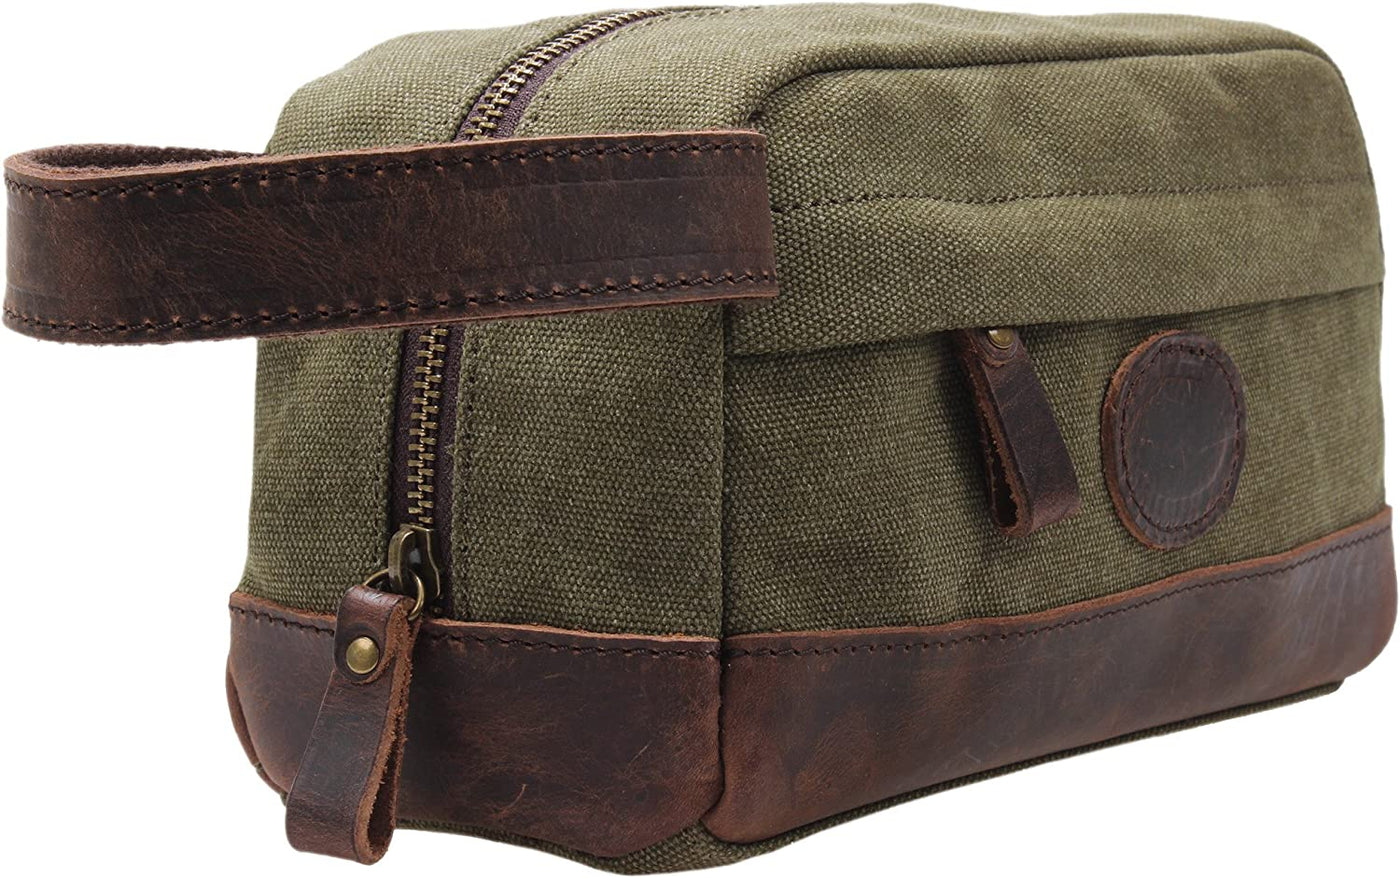 Vintage Leather Canvas Travel Toiletry Bag